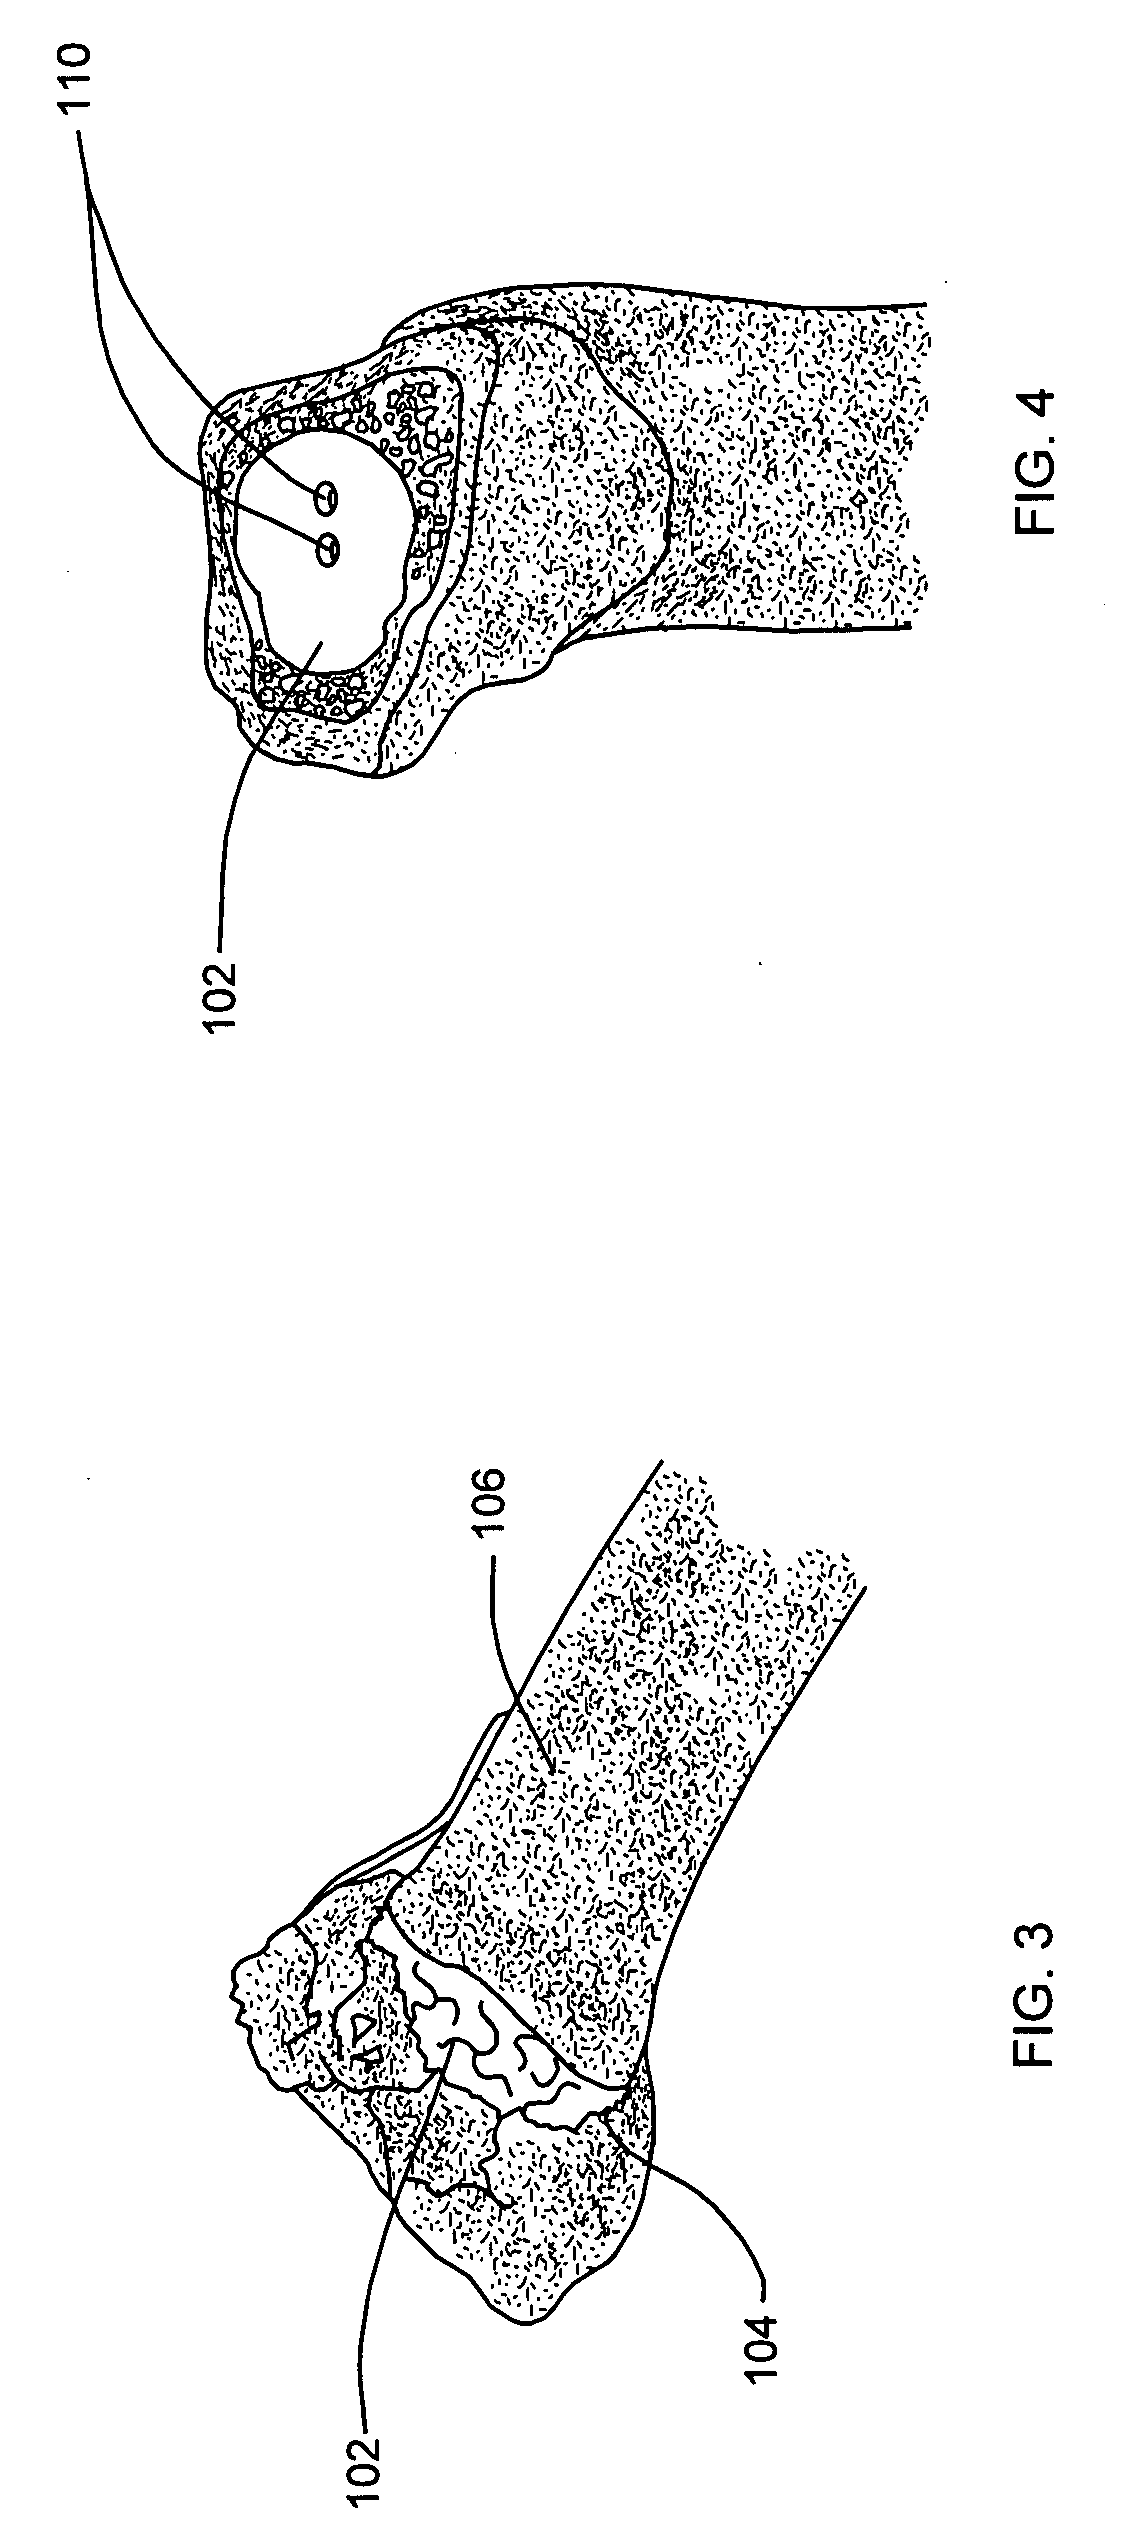 Method for augmenting, reducing, and repairing bone with thermoplastic materials